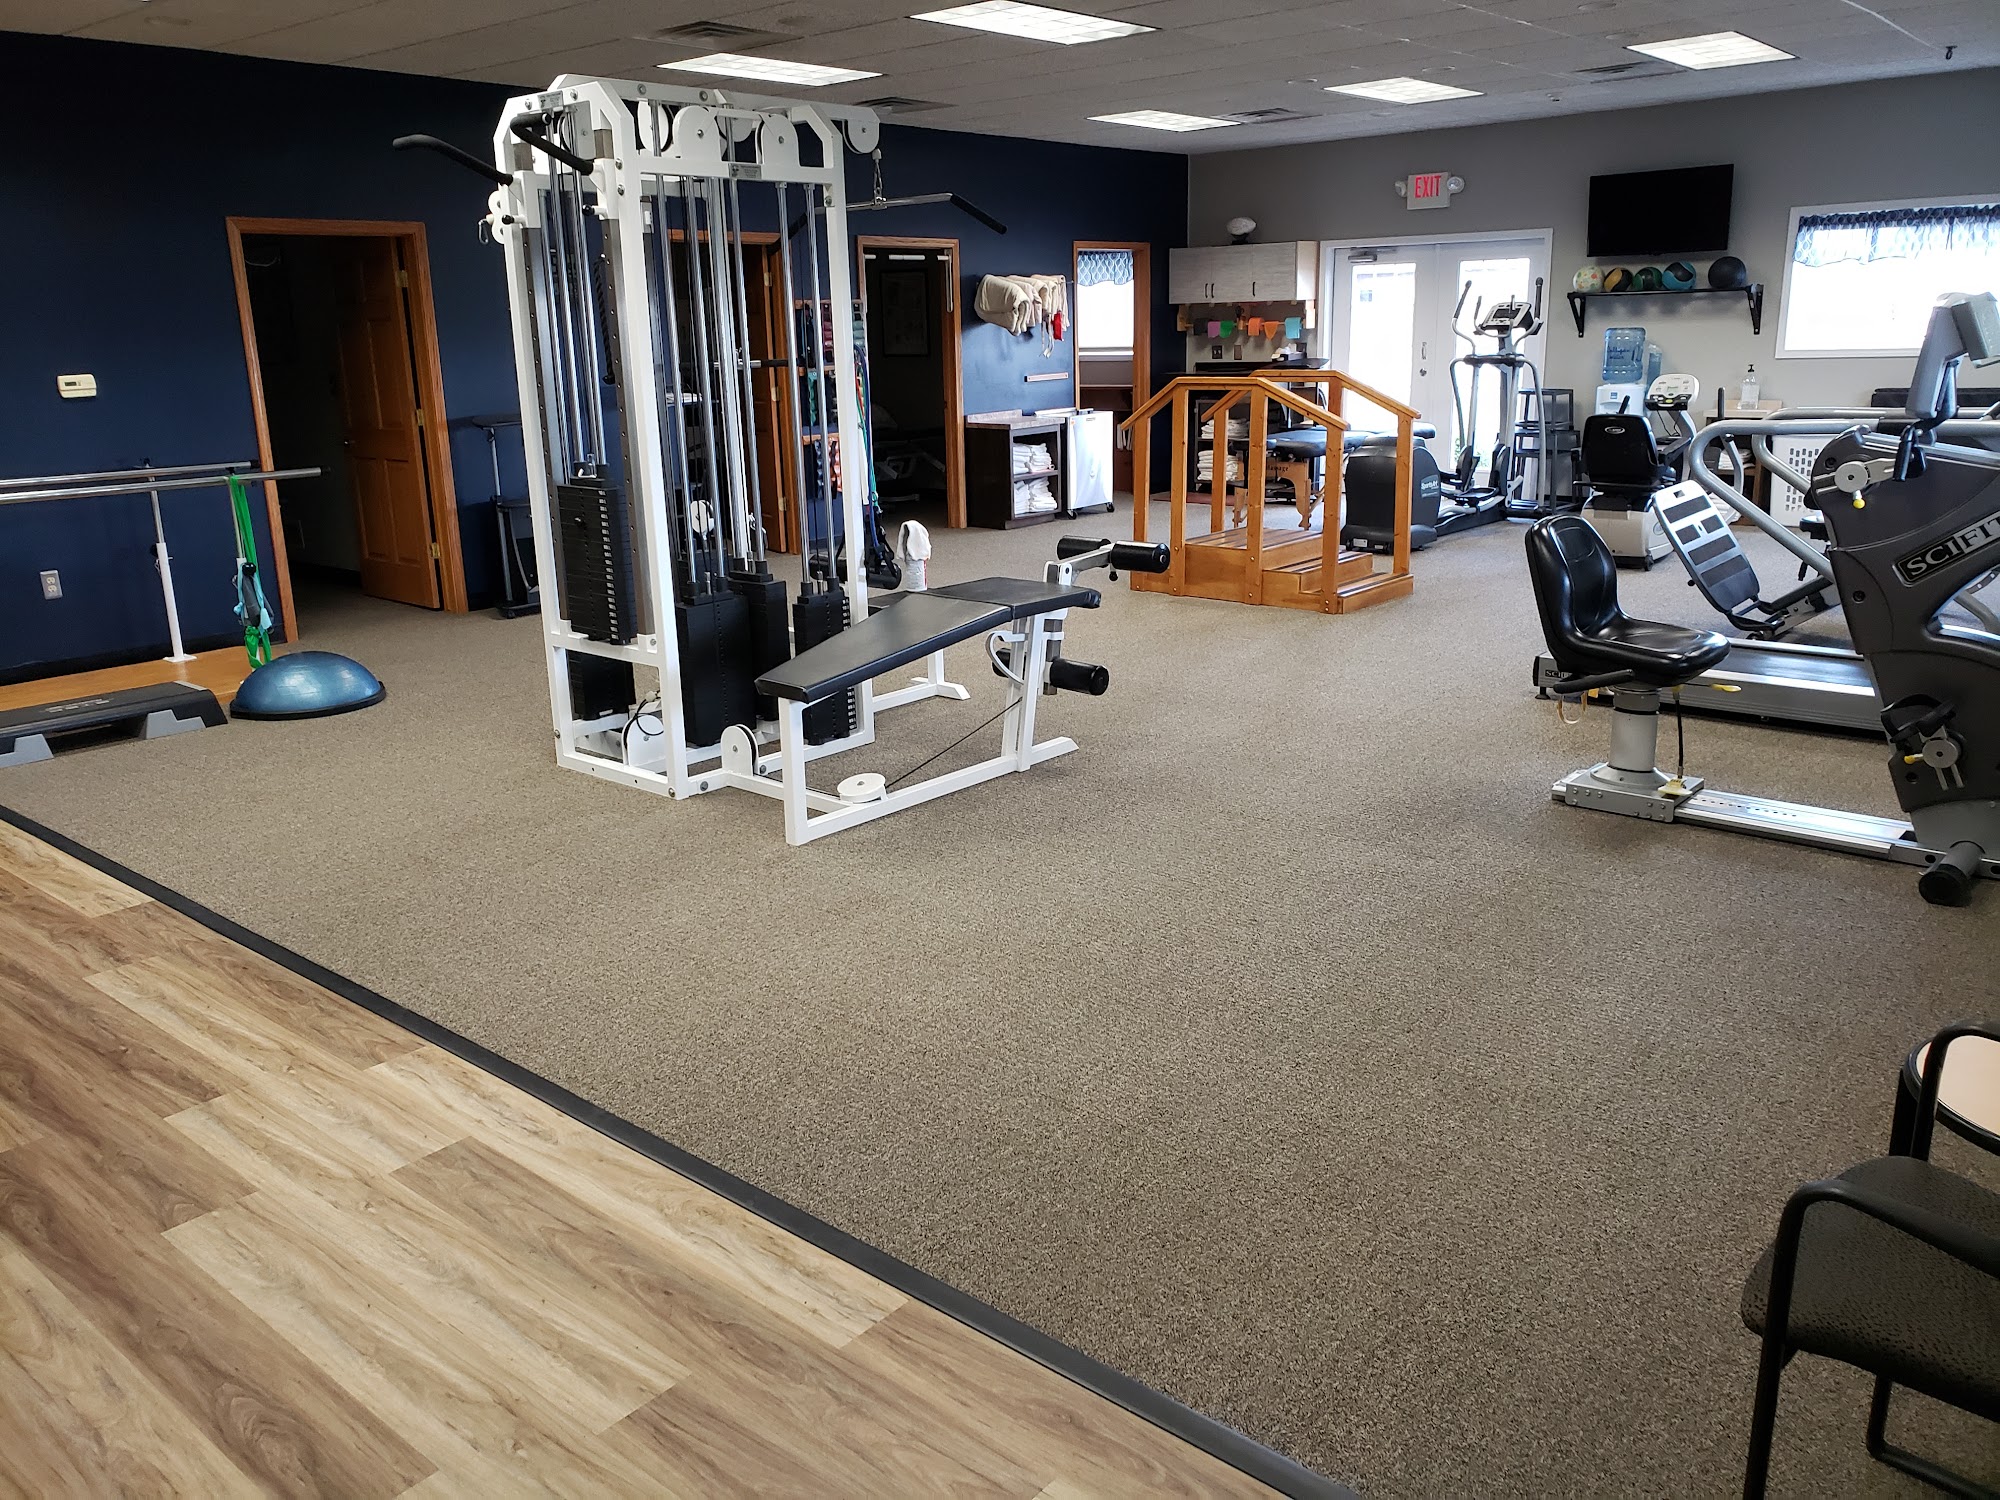 Prostaff Physical Therapy - Yale 7609 S Brockway Rd, Yale Michigan 48097